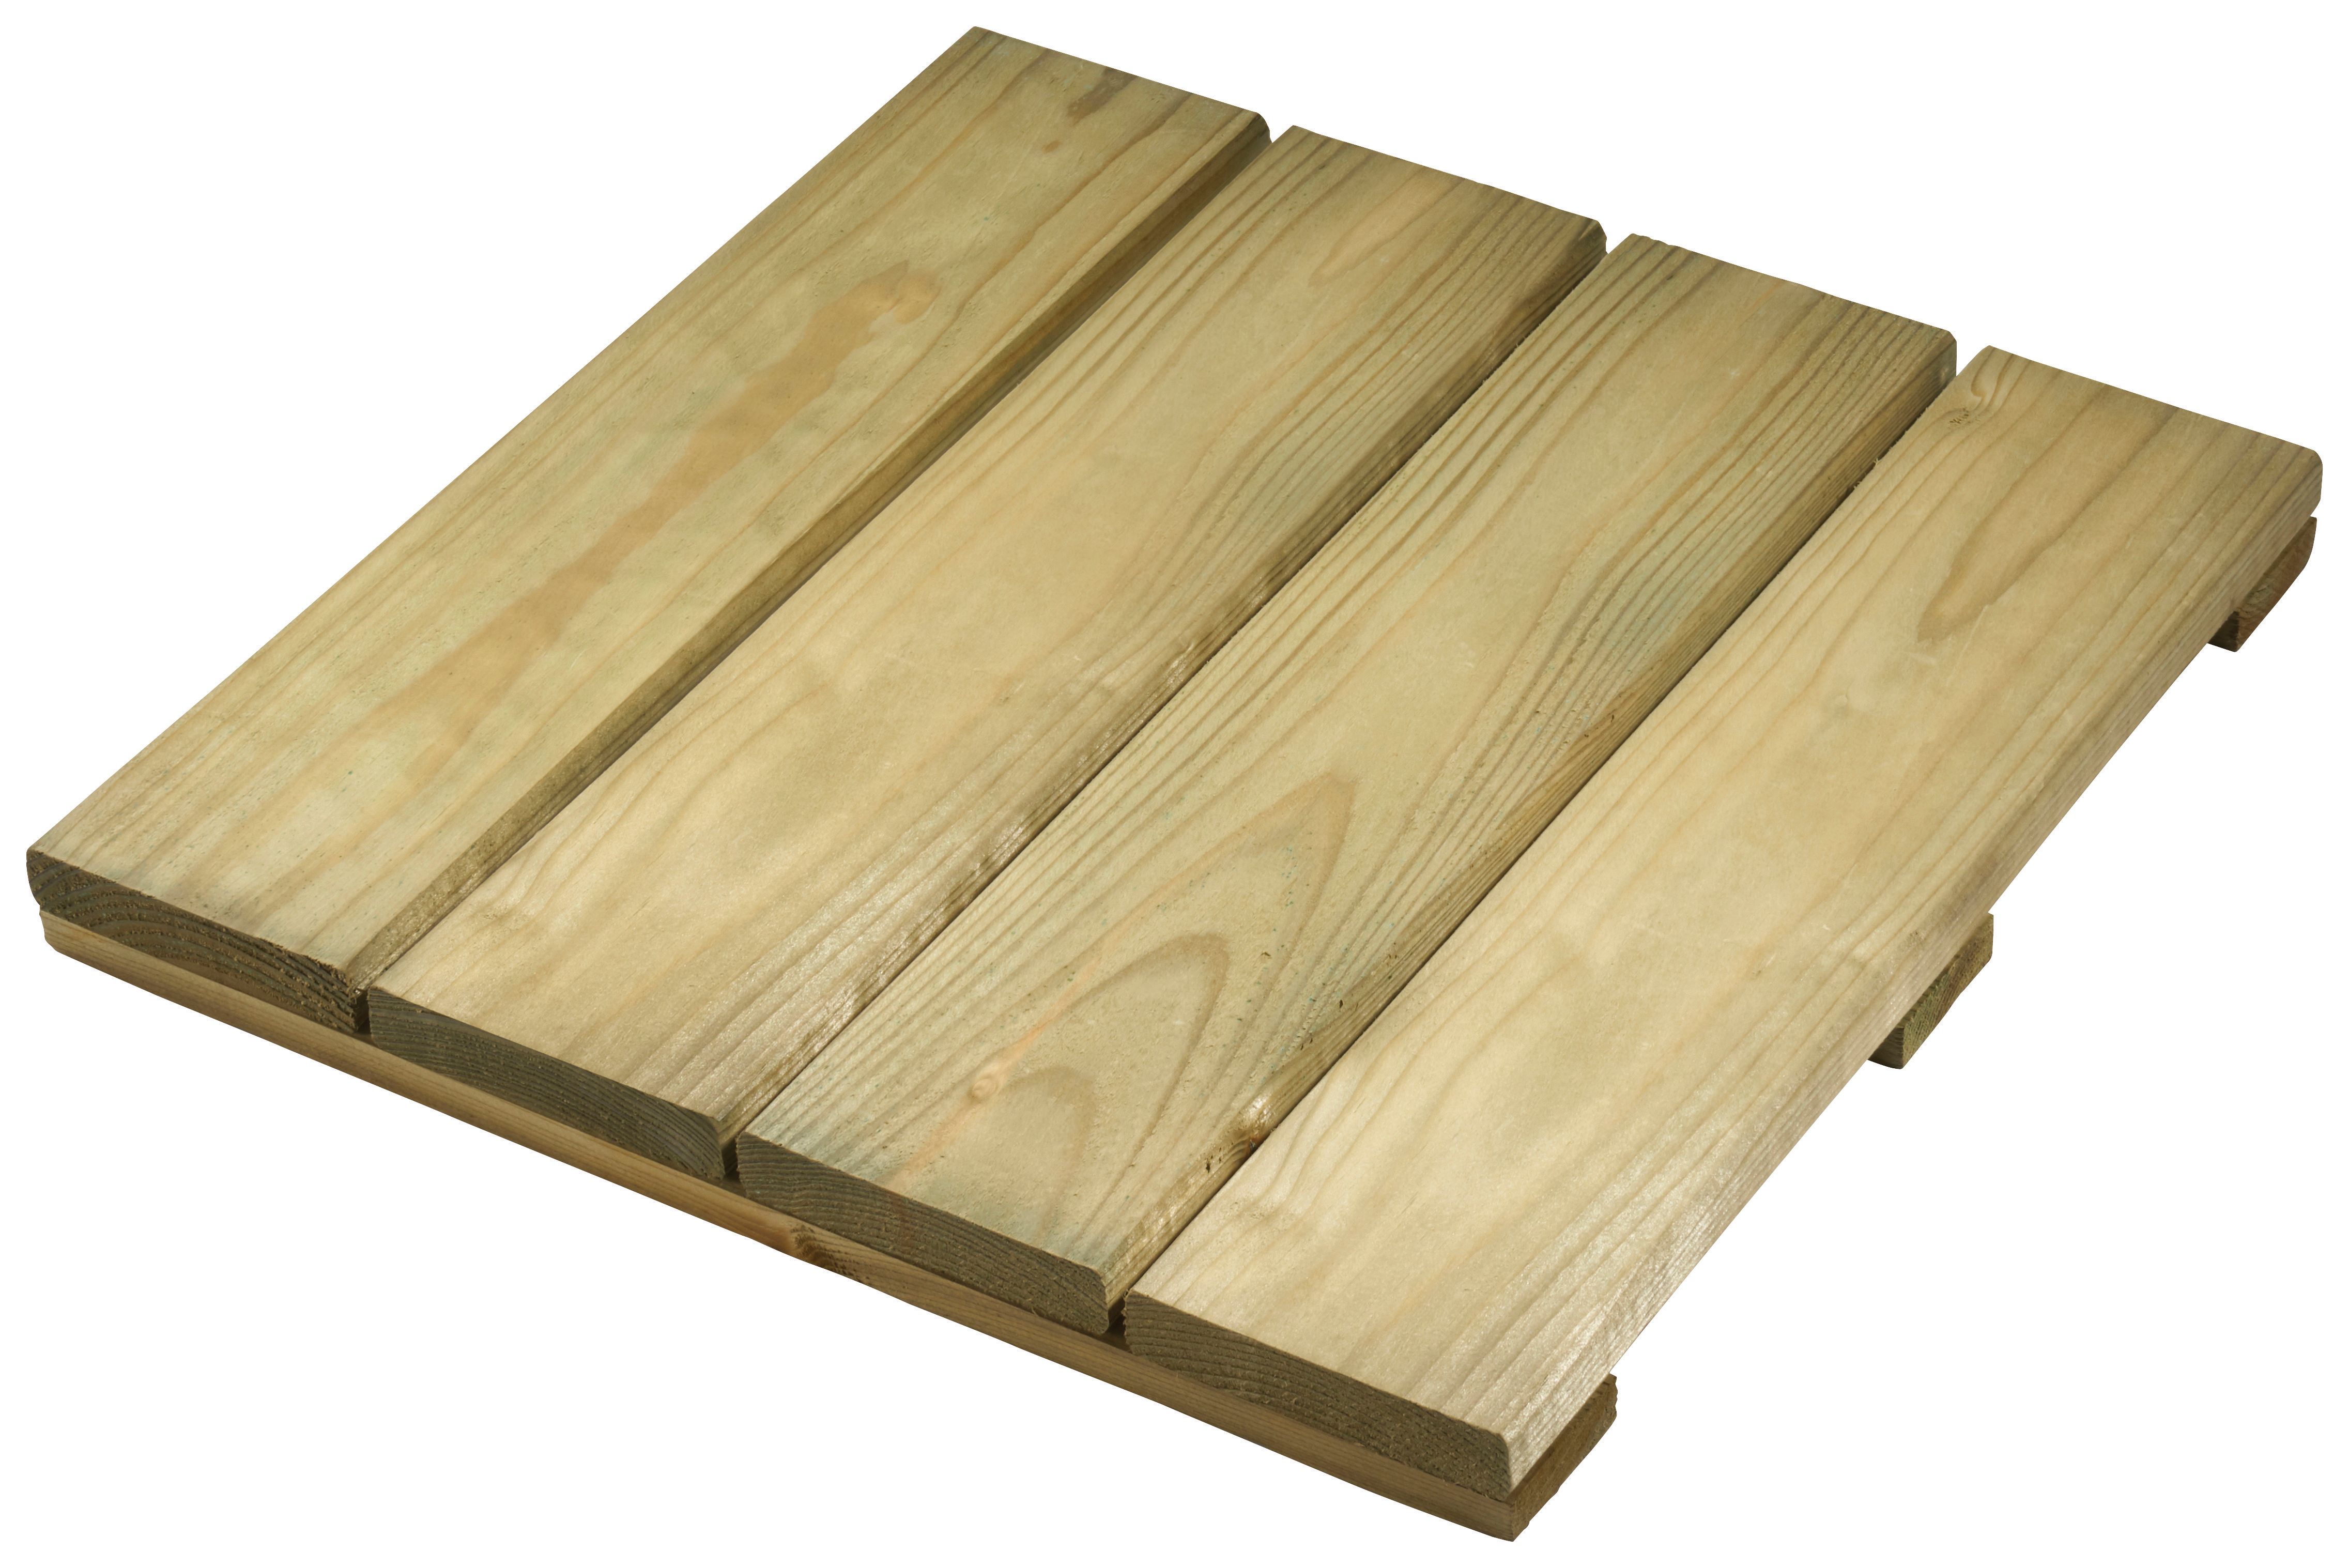 Wickes Softwood Pine Deck Tile - 32 x 400 x 400mm